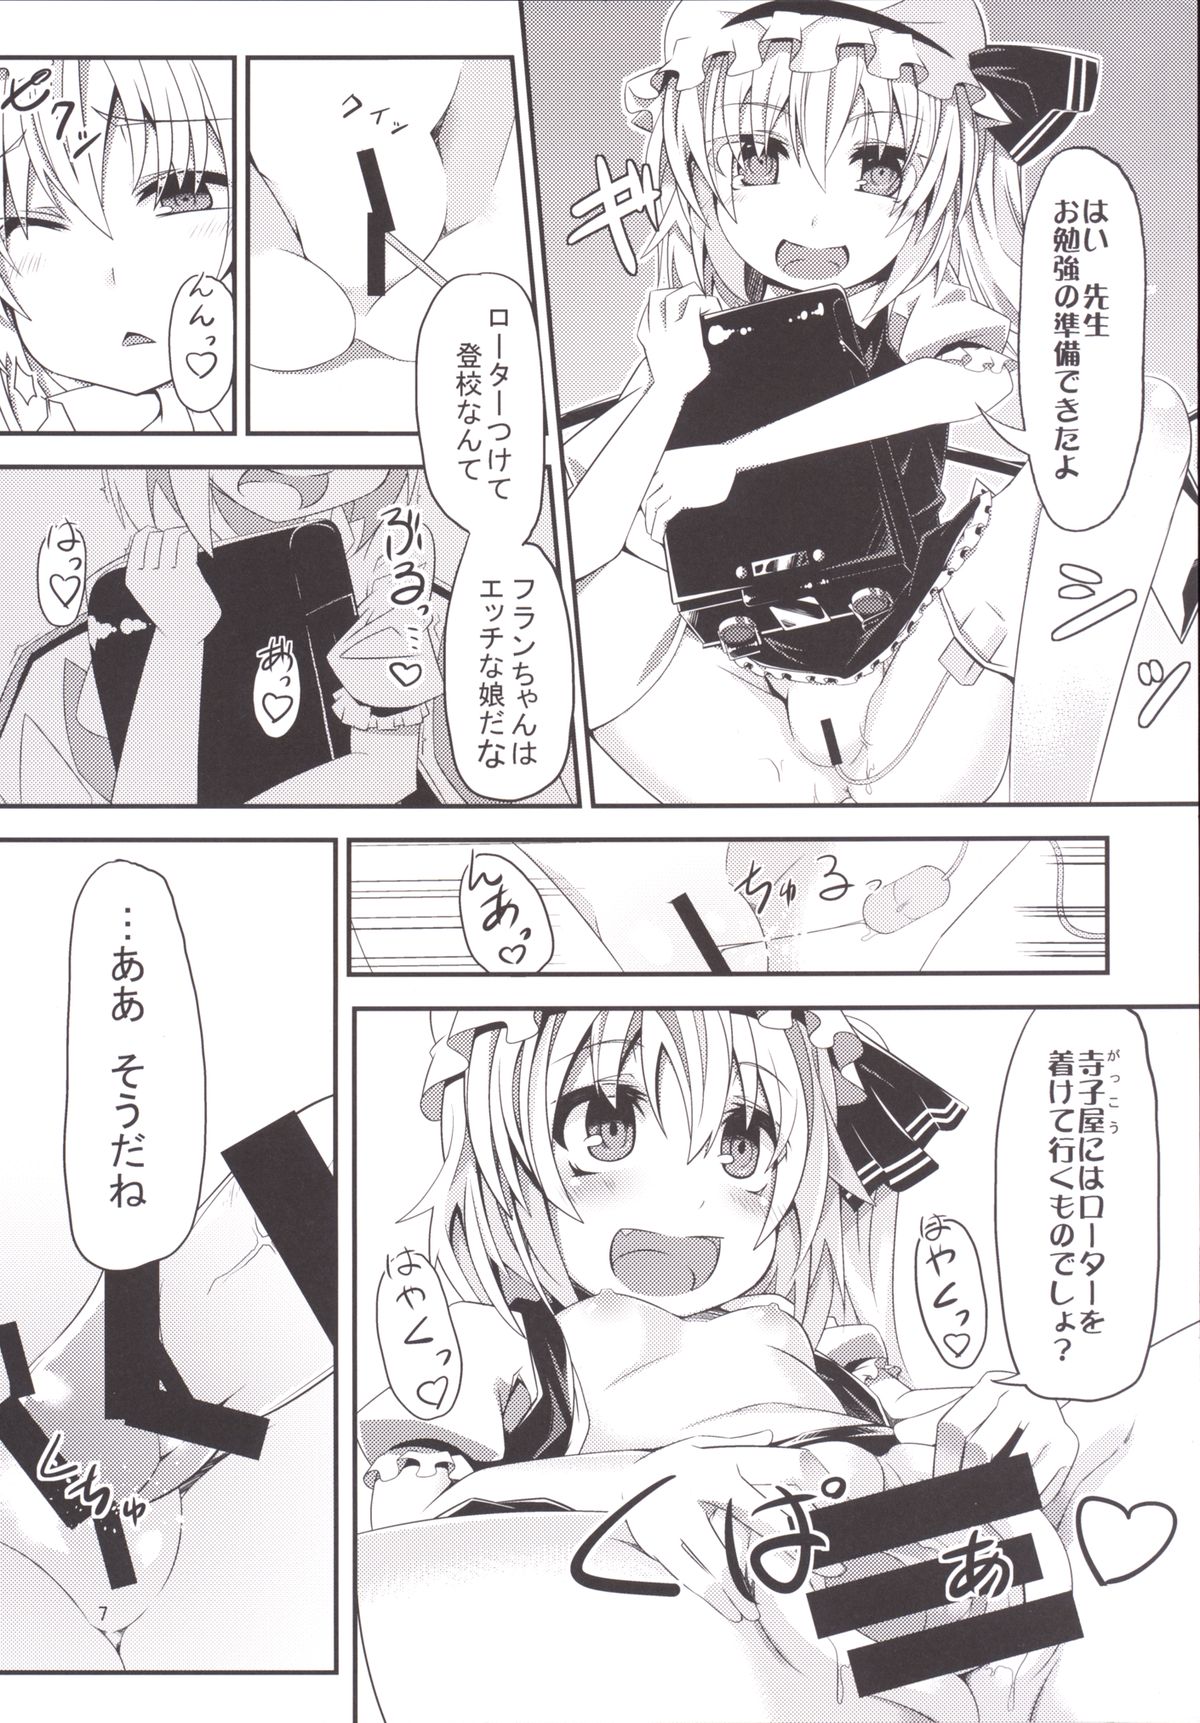 [Angelic Feather (Land Sale)] HYPNOTICA FLANDRE -Flan-chan to Saimin Sex- (Touhou Project) [Digital] page 6 full